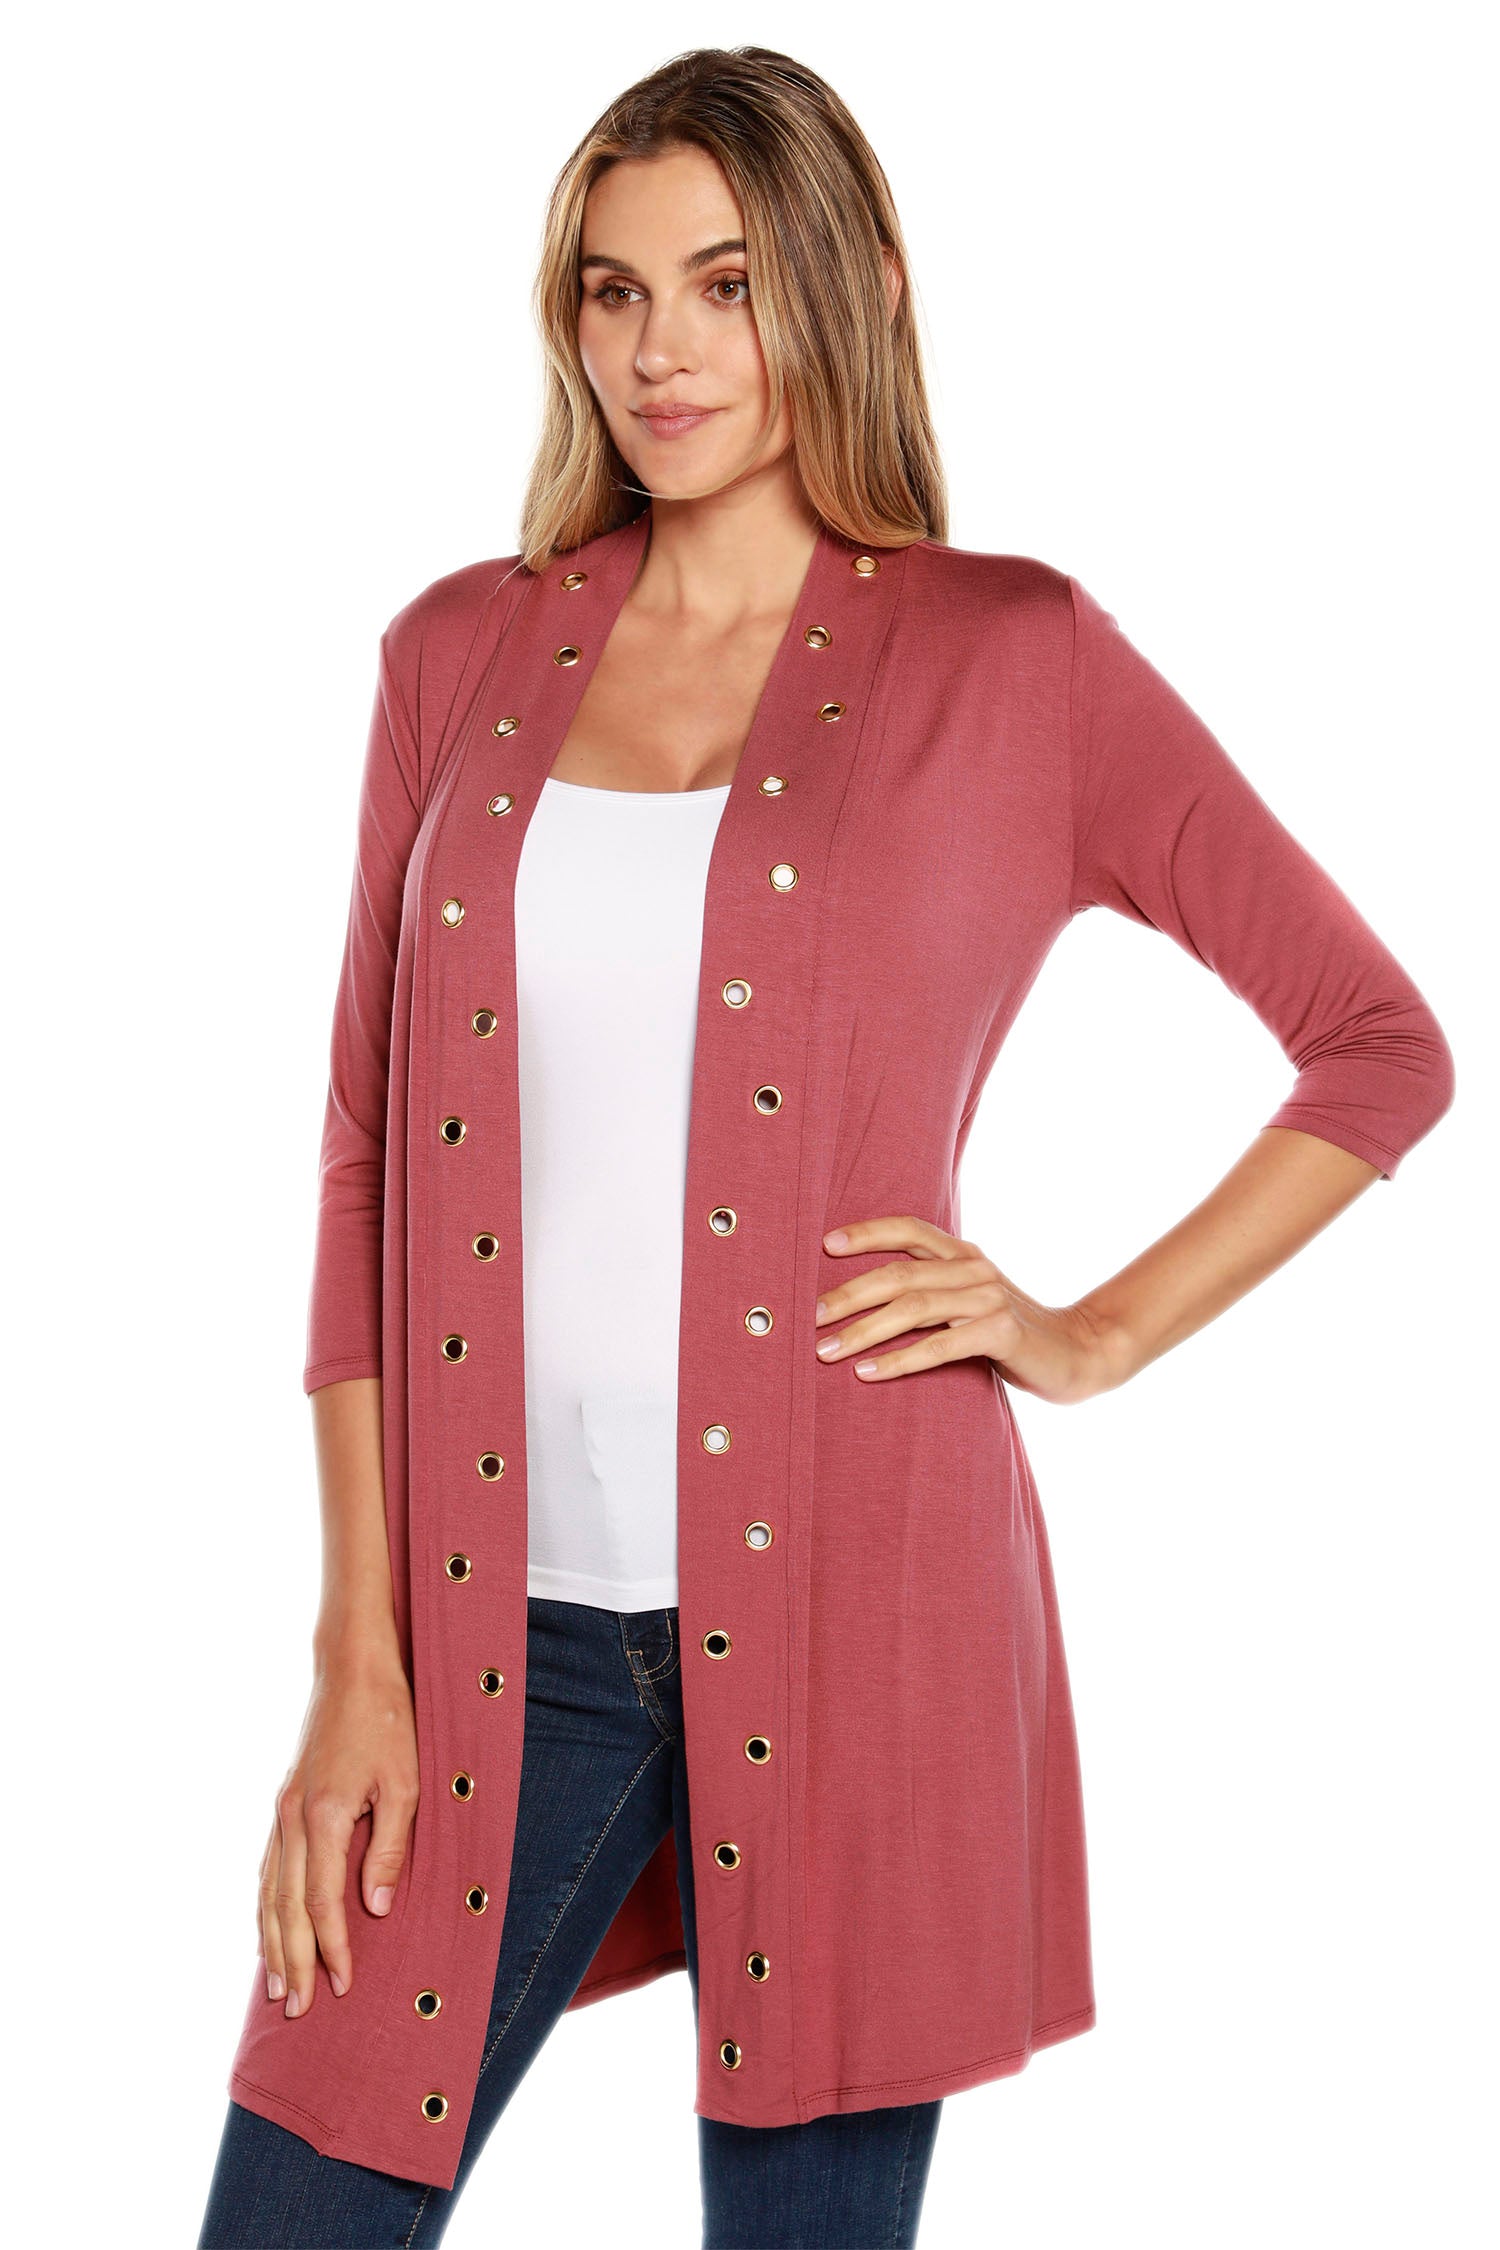 Women's 3/4 Sleeve Mid-Thigh Jersey Cardigan with Grommet Trim